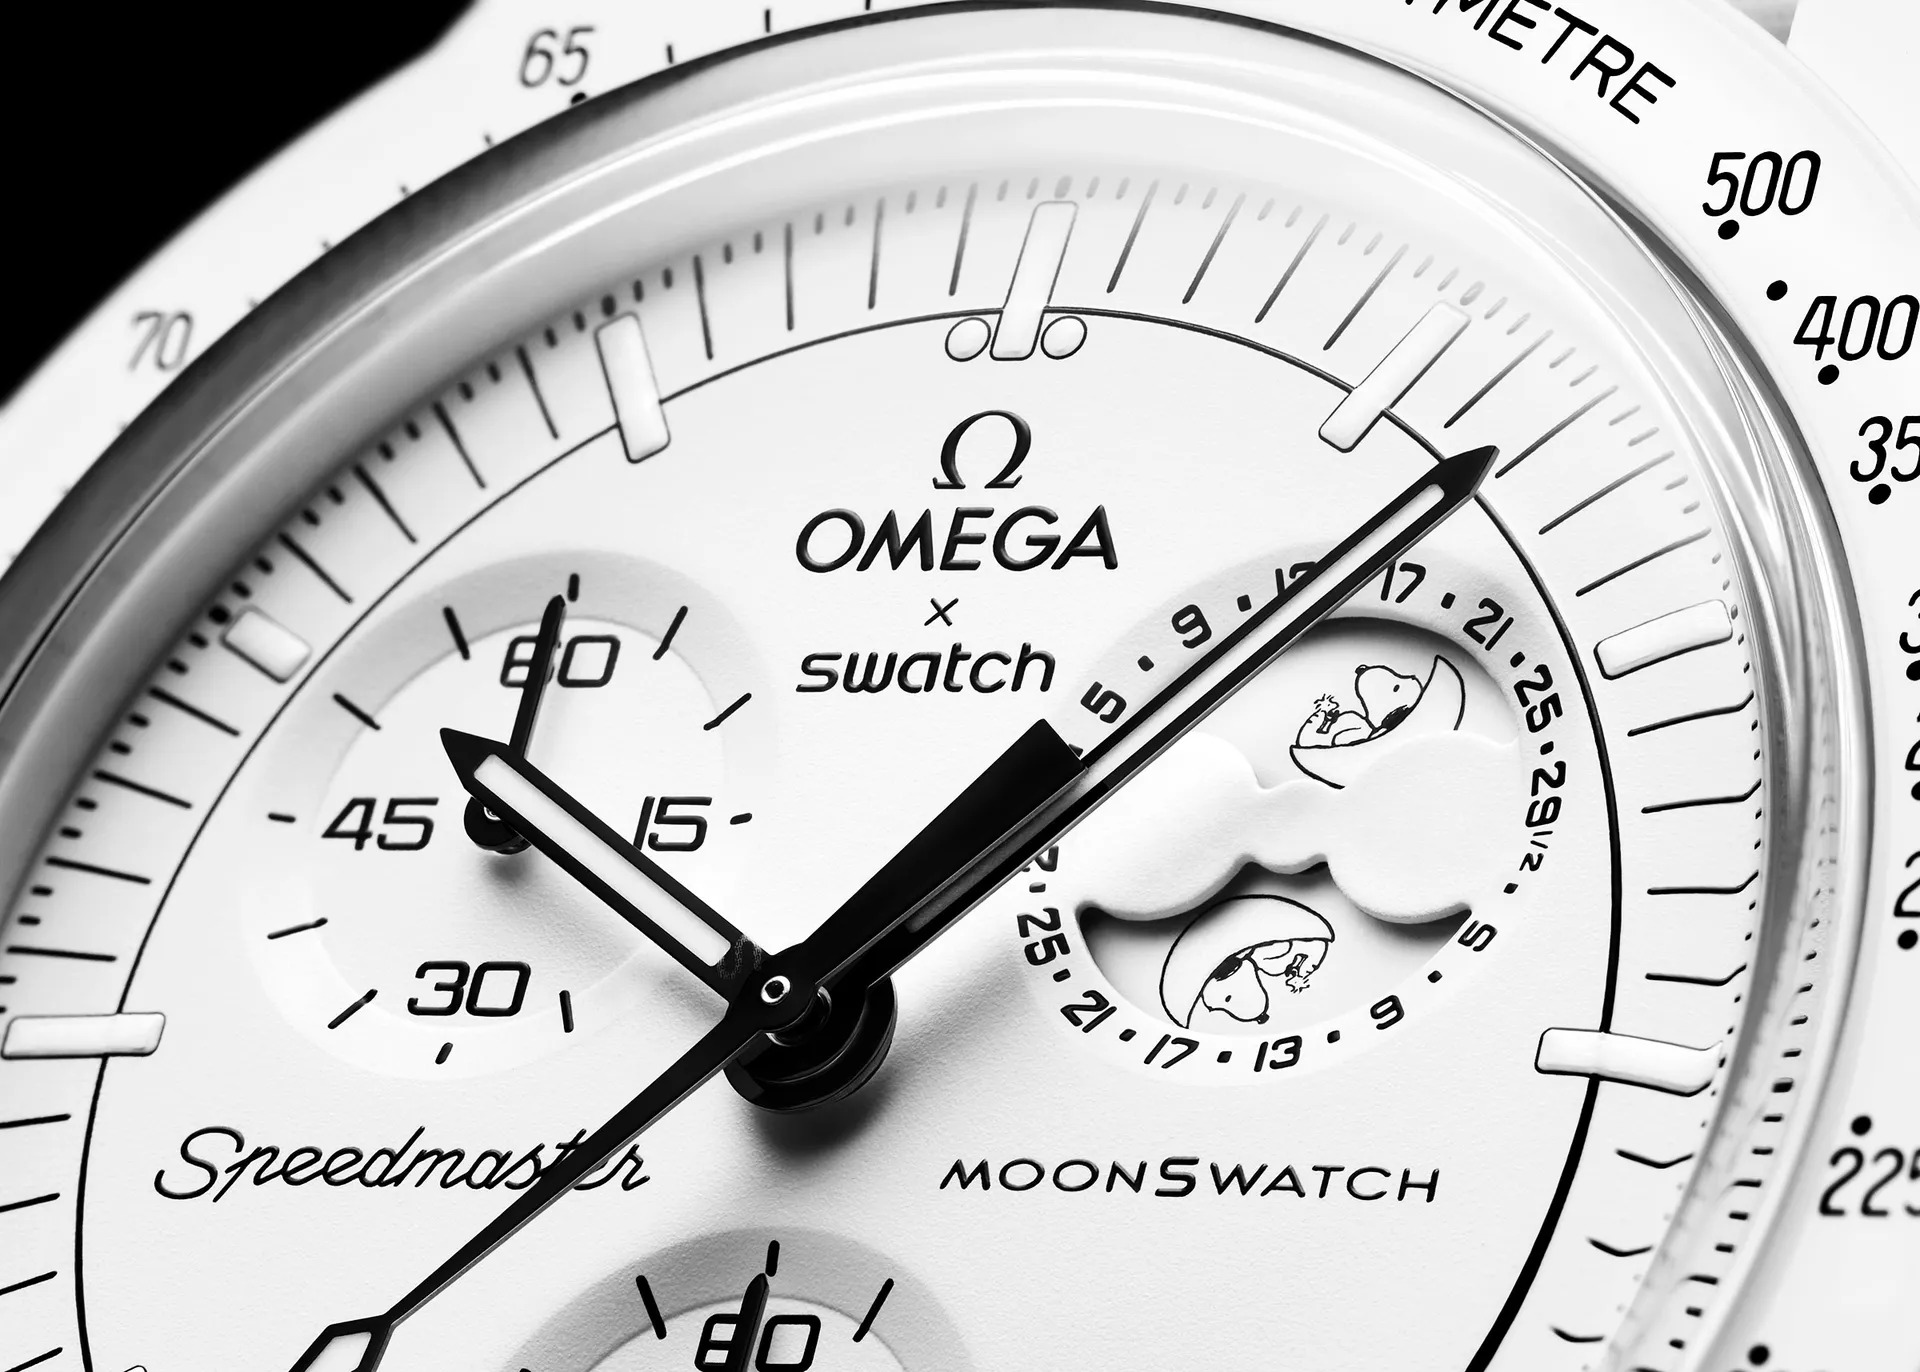 Snoopy MoonSwatch Lands! Omega x Swatch Release New Bioceramic Watch